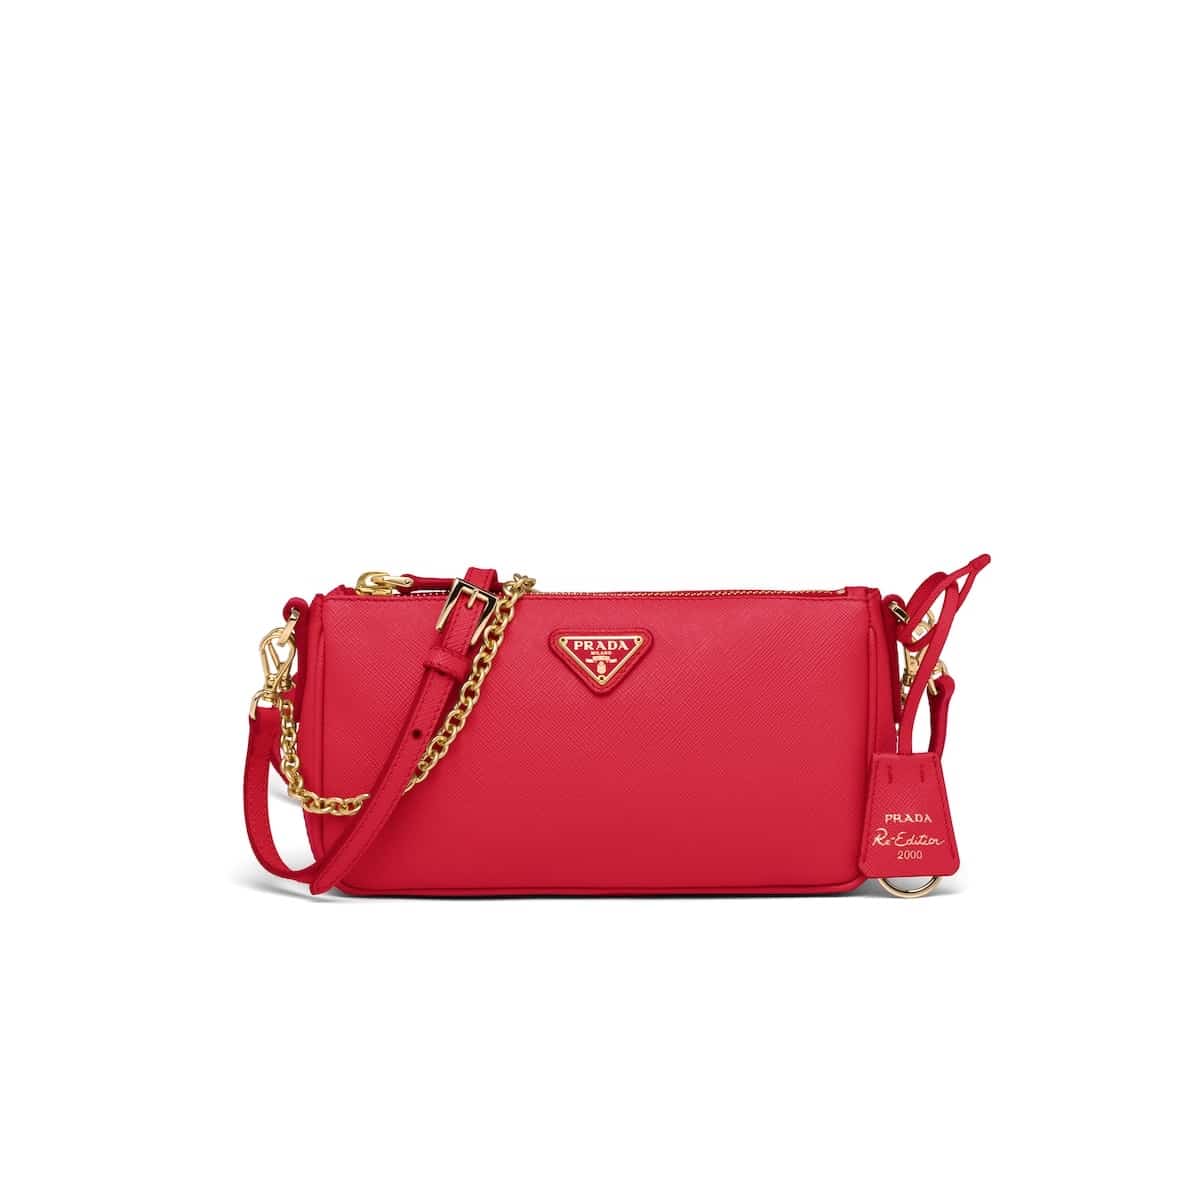 Prada Re-Edition 2005 Saffiano leather bag in Fiery Red - Irene